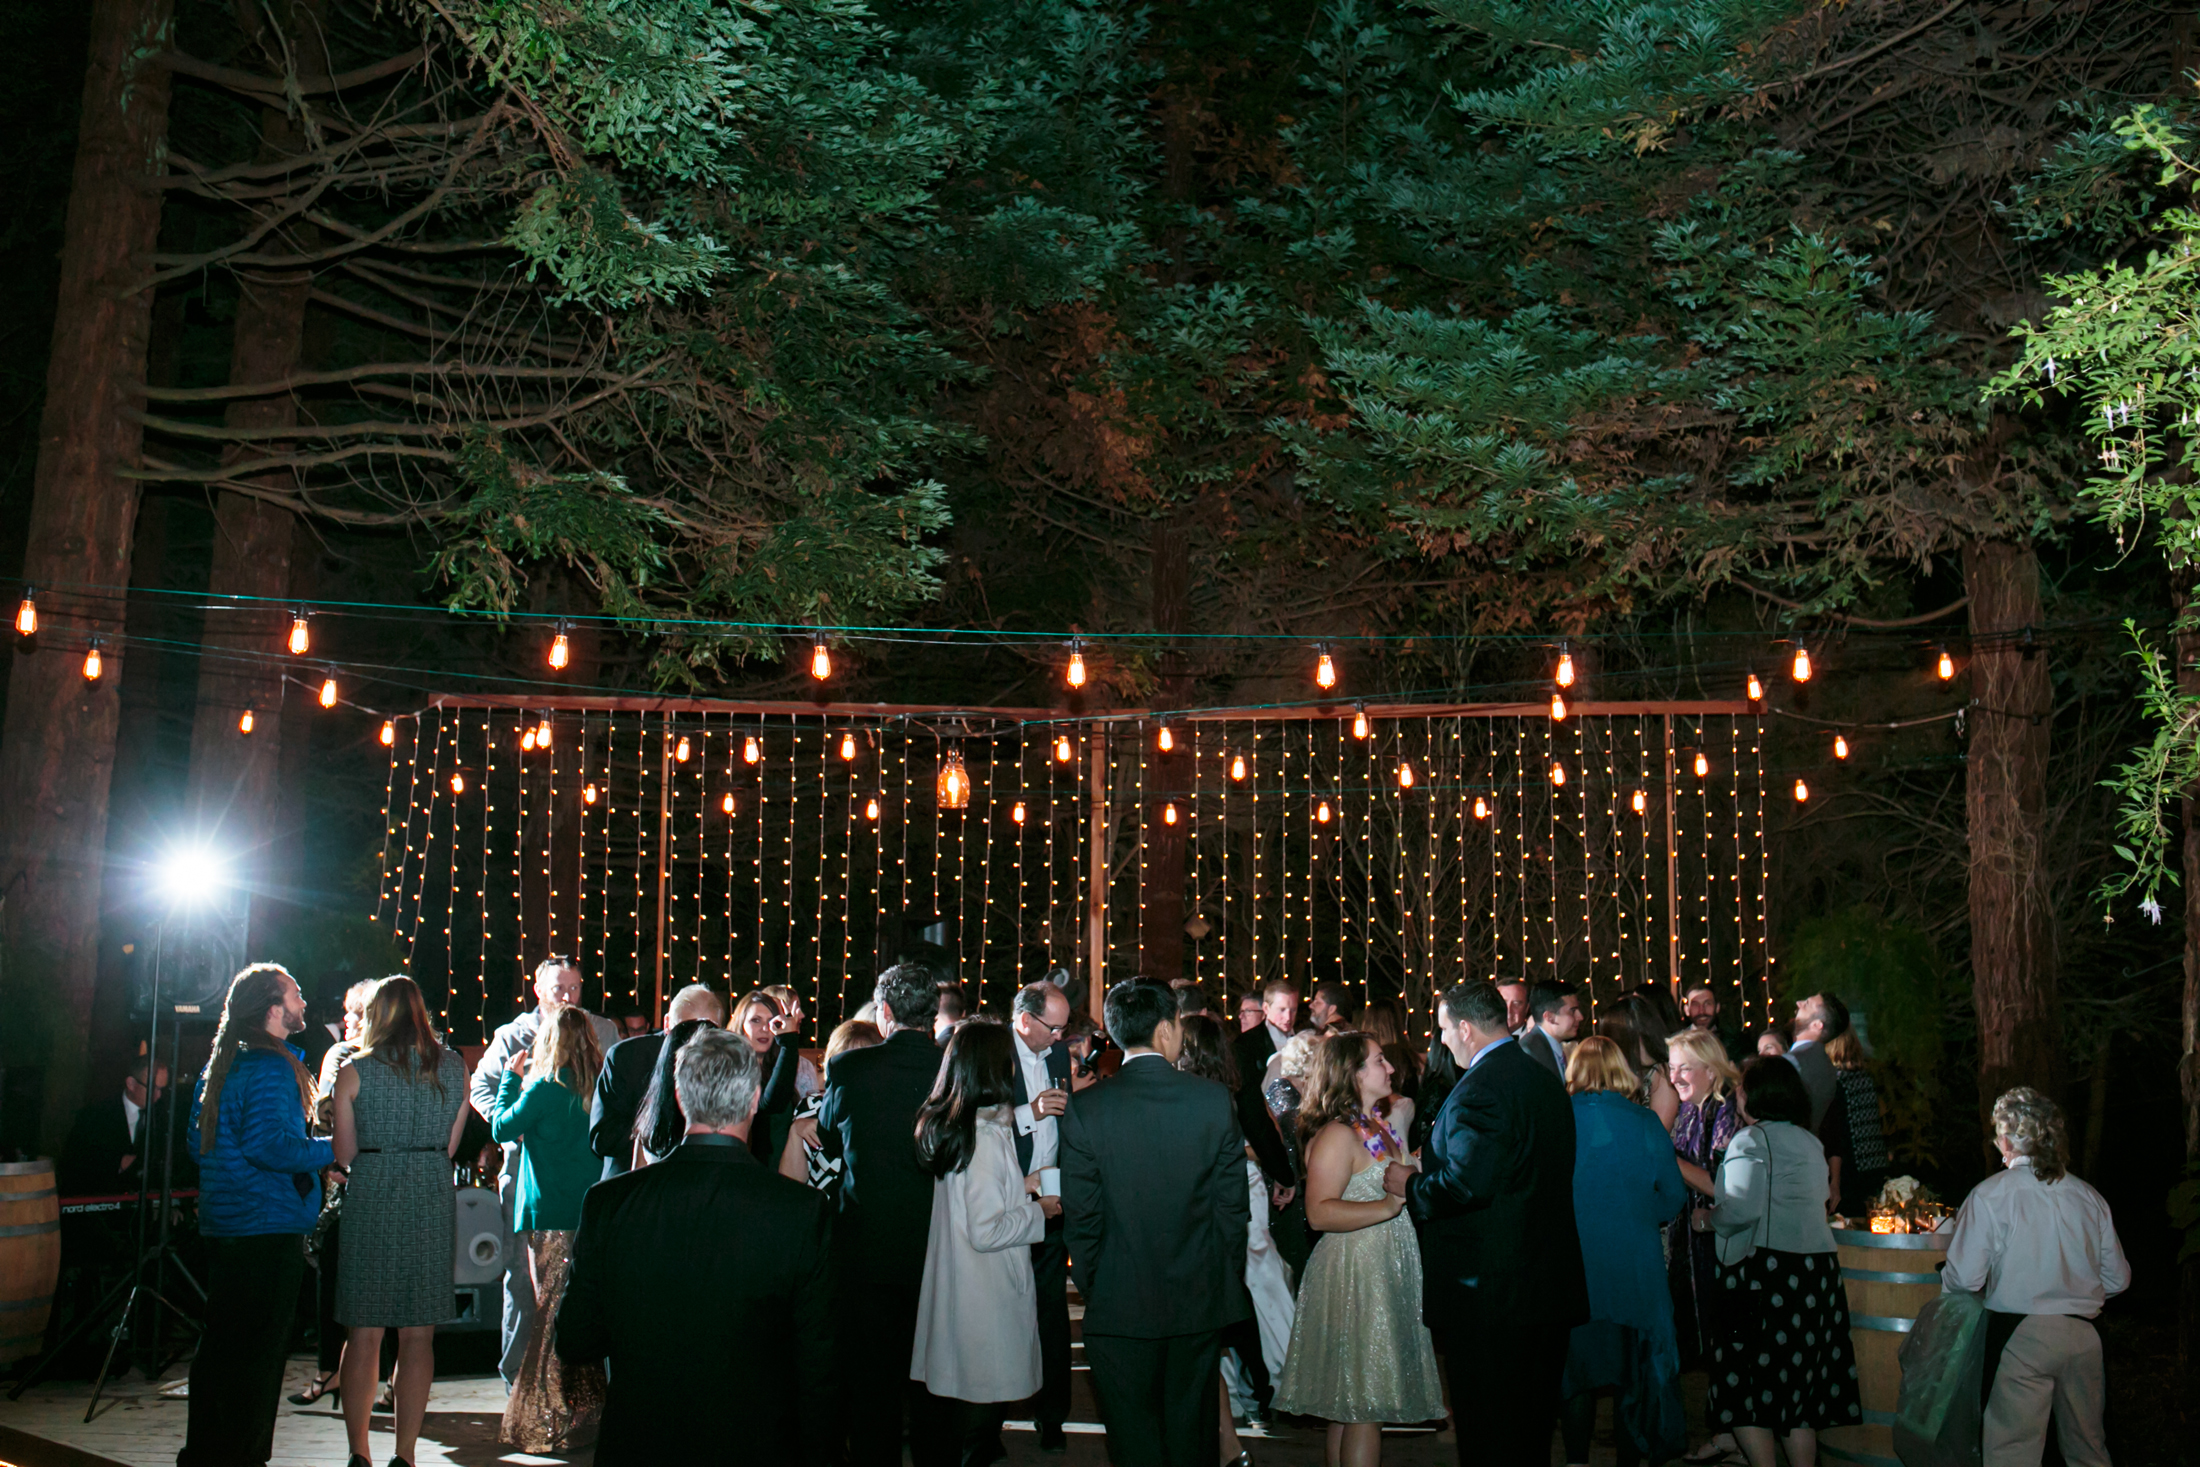 A far away look of the entire dance floor shows all the different lighting and the Redwood trees above.